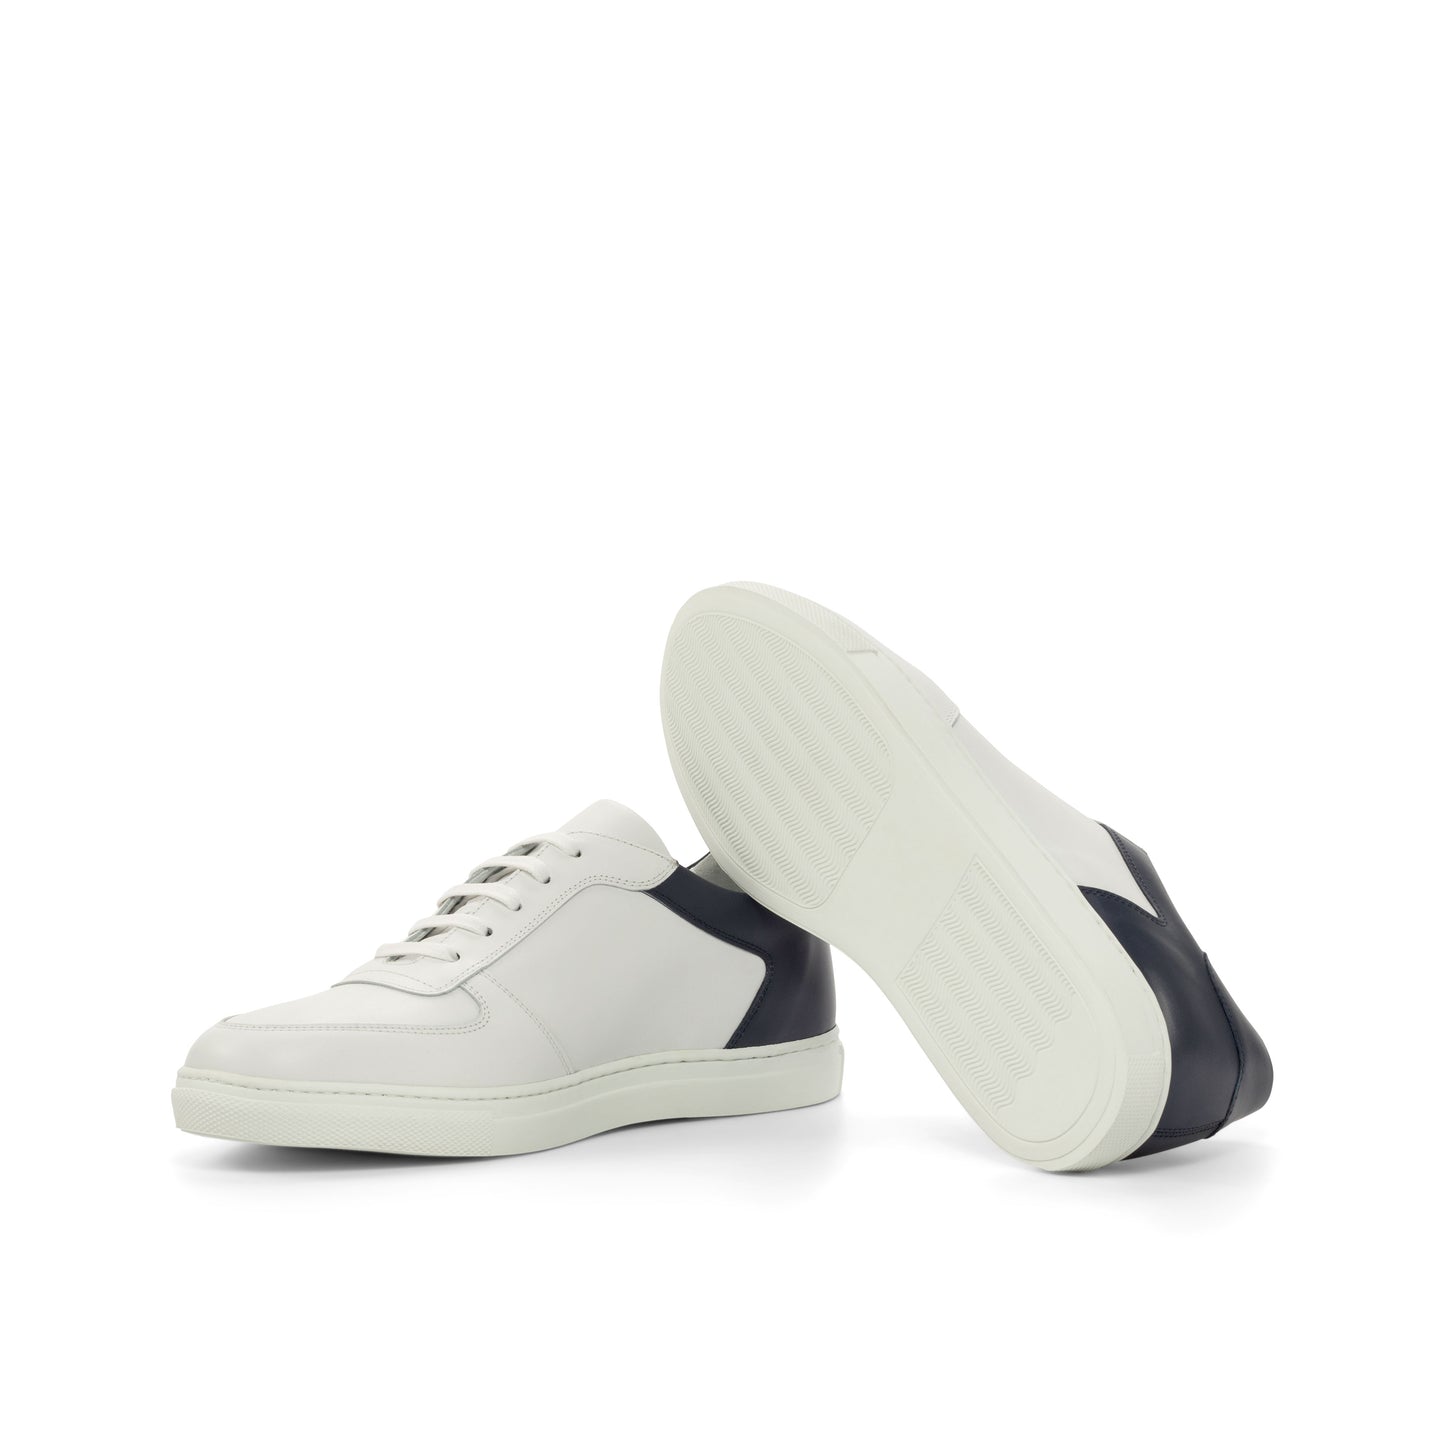 SUITCAFE Low Top White Navy Nappa Leather Men's Sneaker